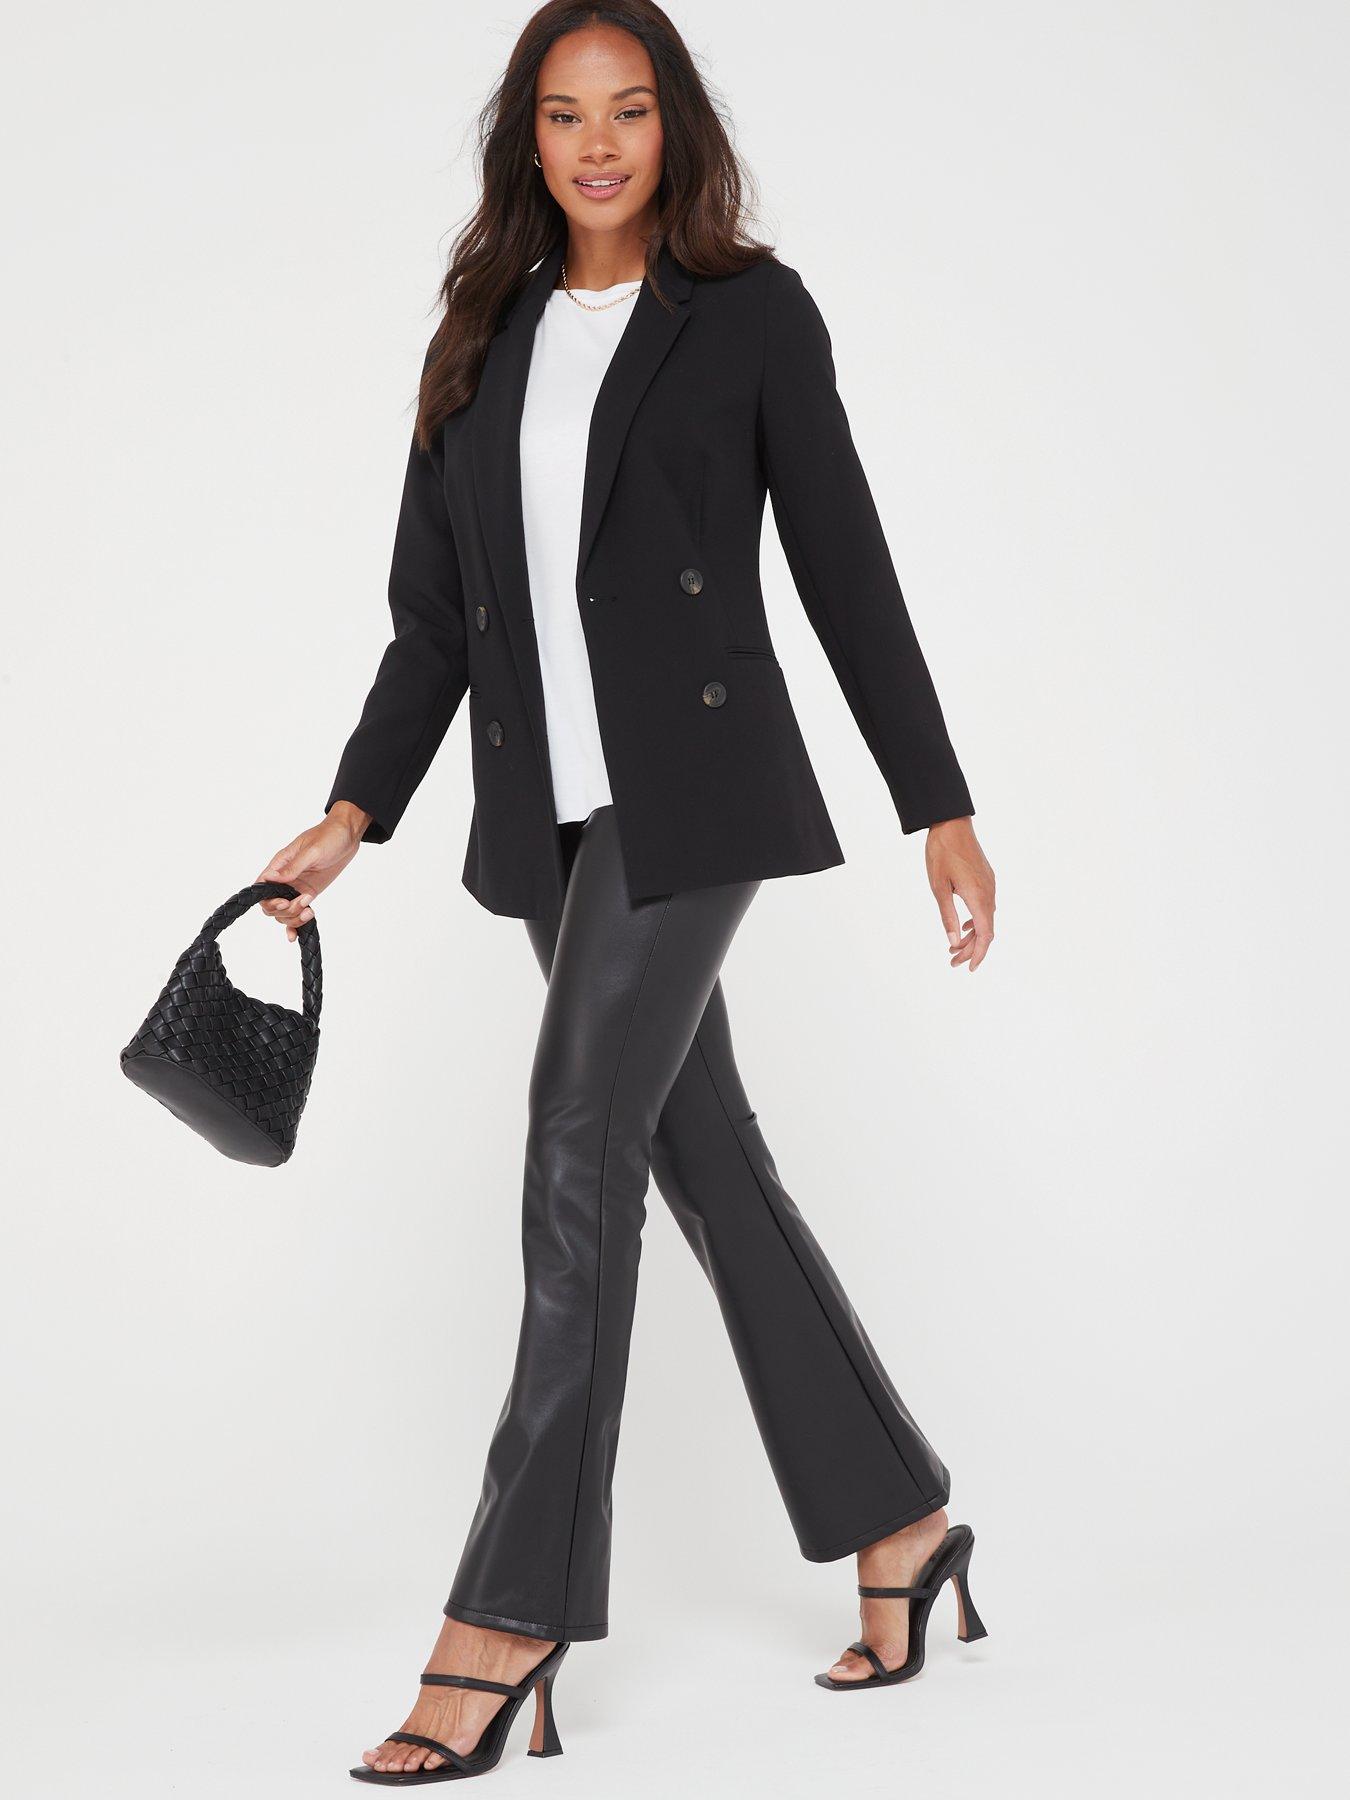 Workwear You'll Actually Want to Wear Outside the Office — Lucy's whims